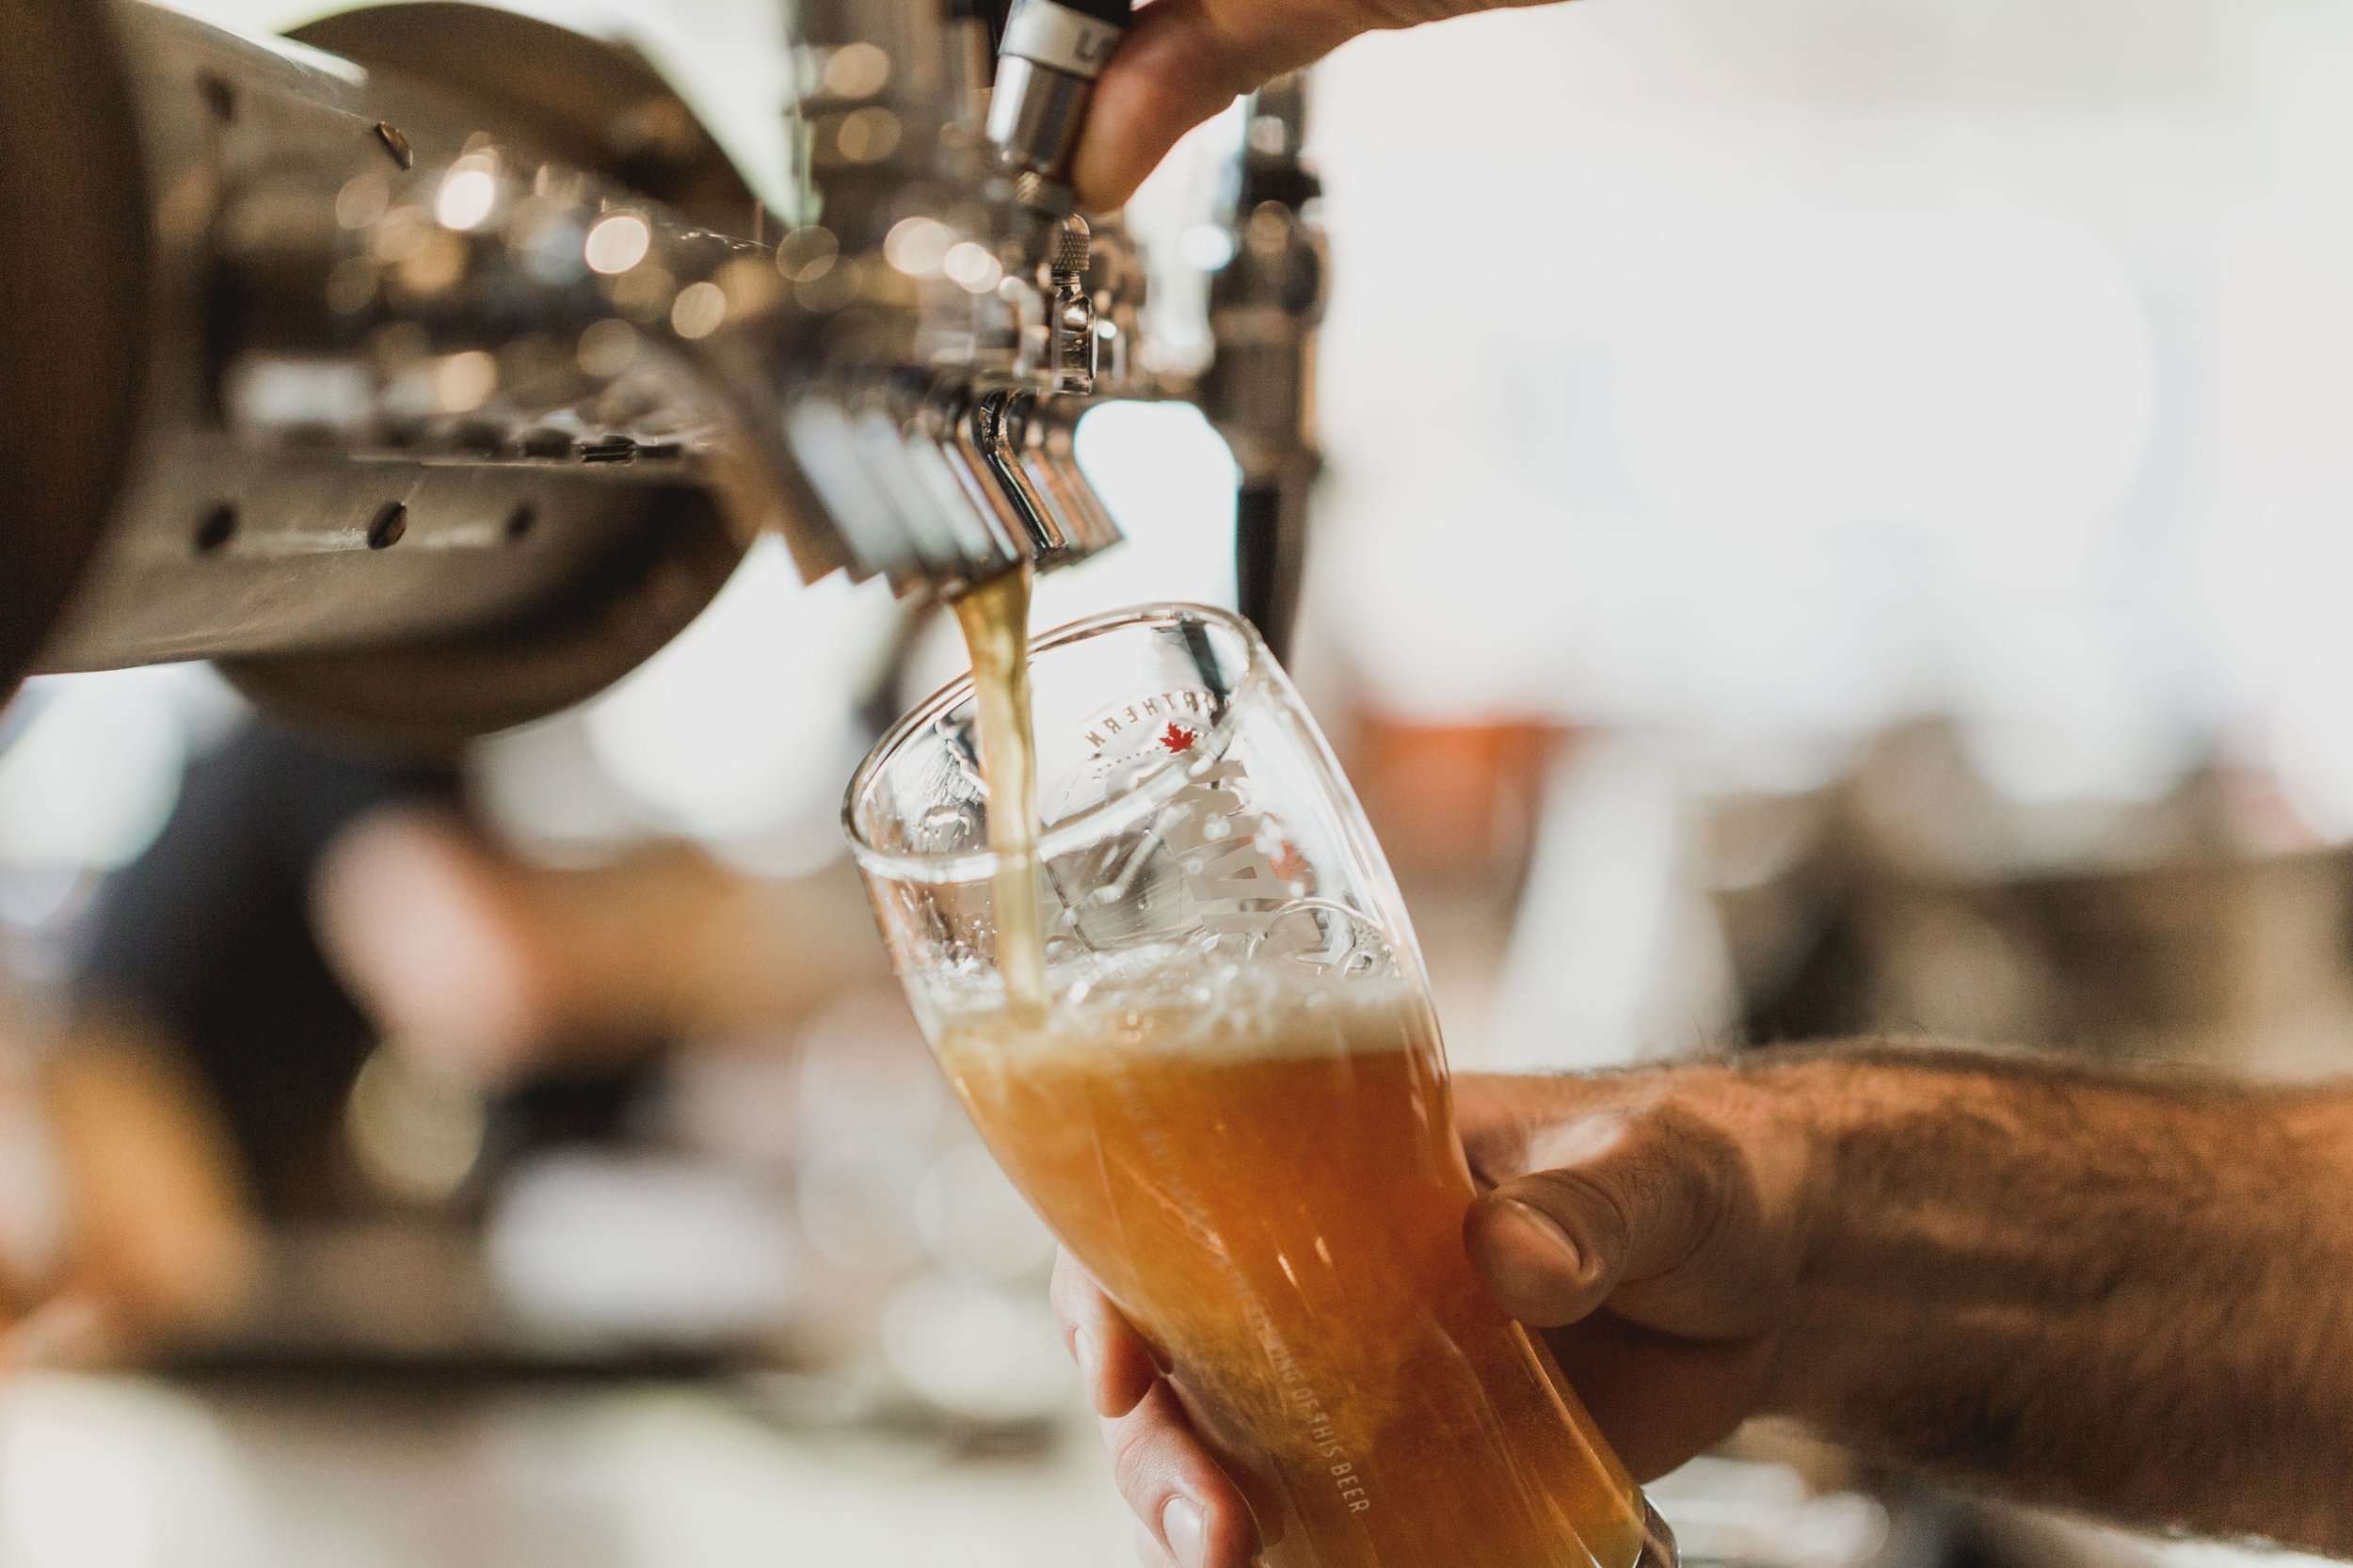 Stock Image - Pouring pint of beer.jpg